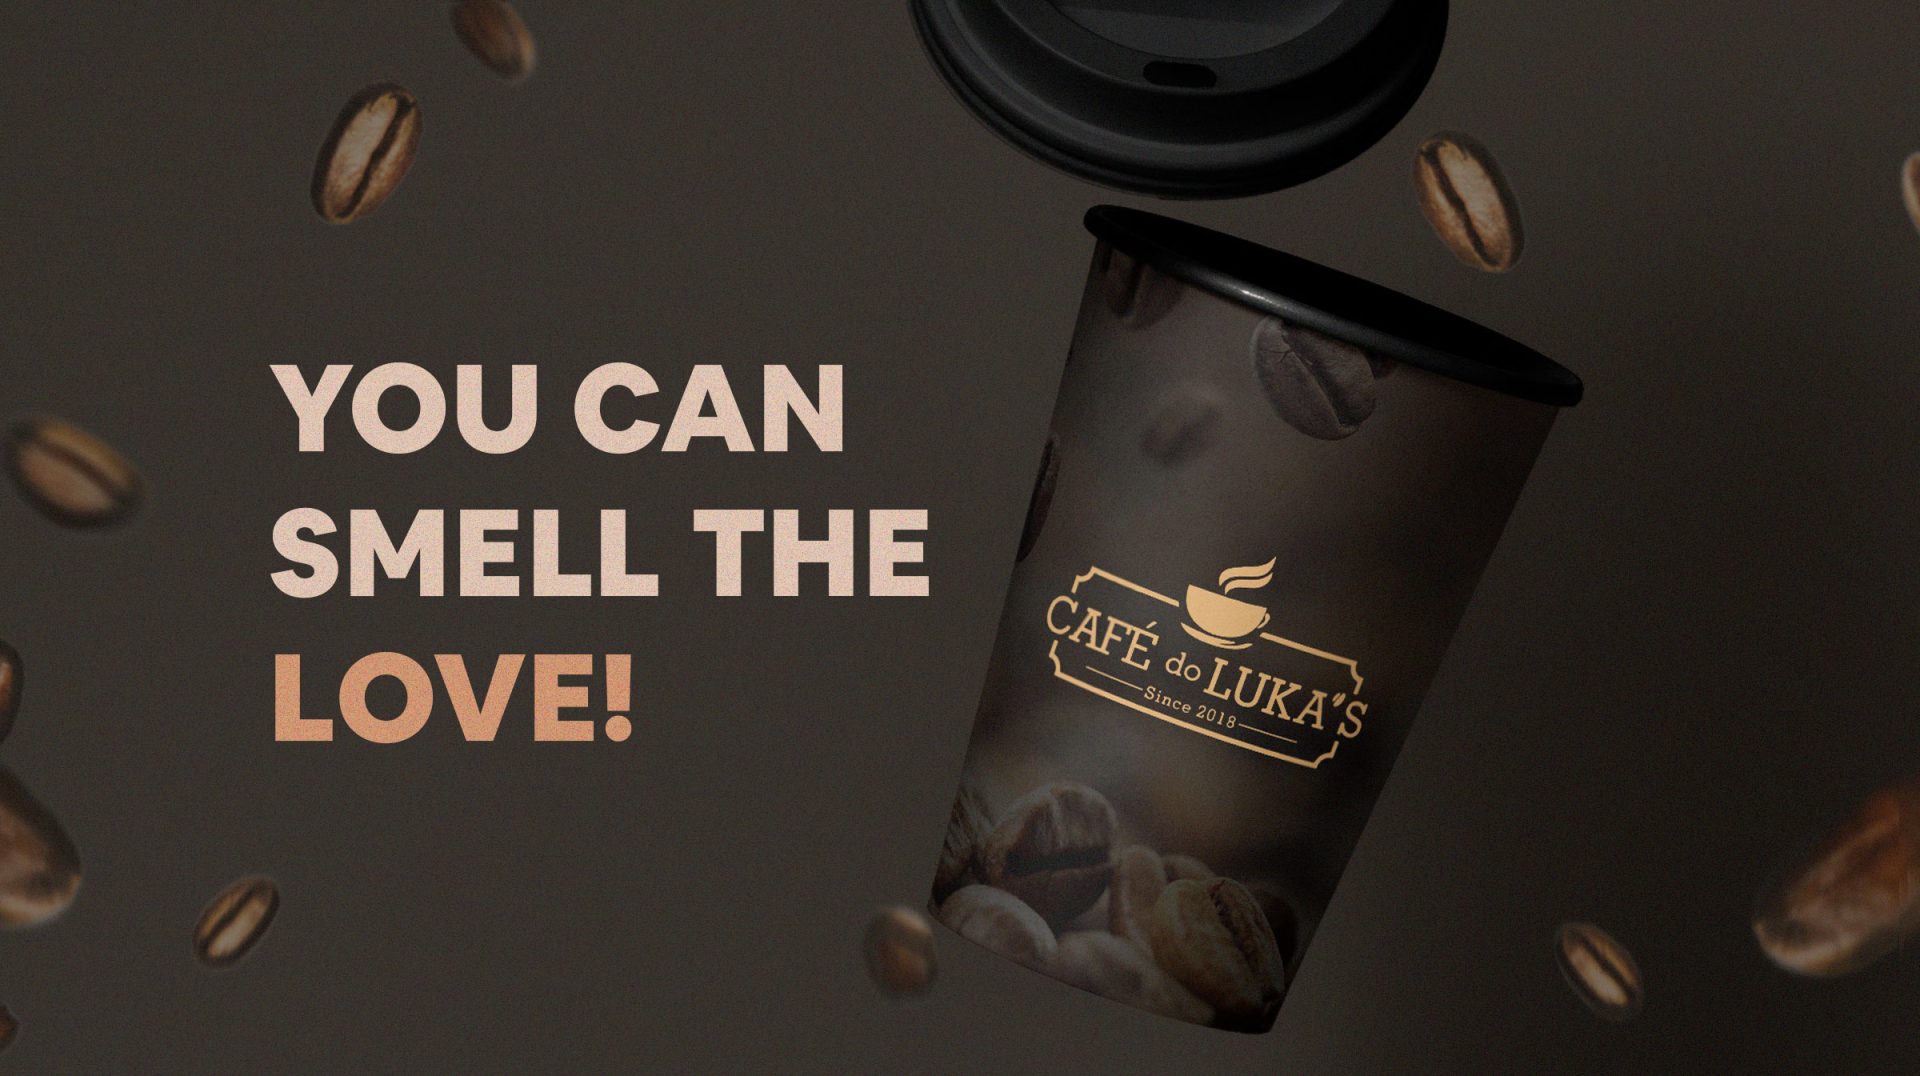 We celebrate the passion for coffee and the experience of savoring an authentic cup.